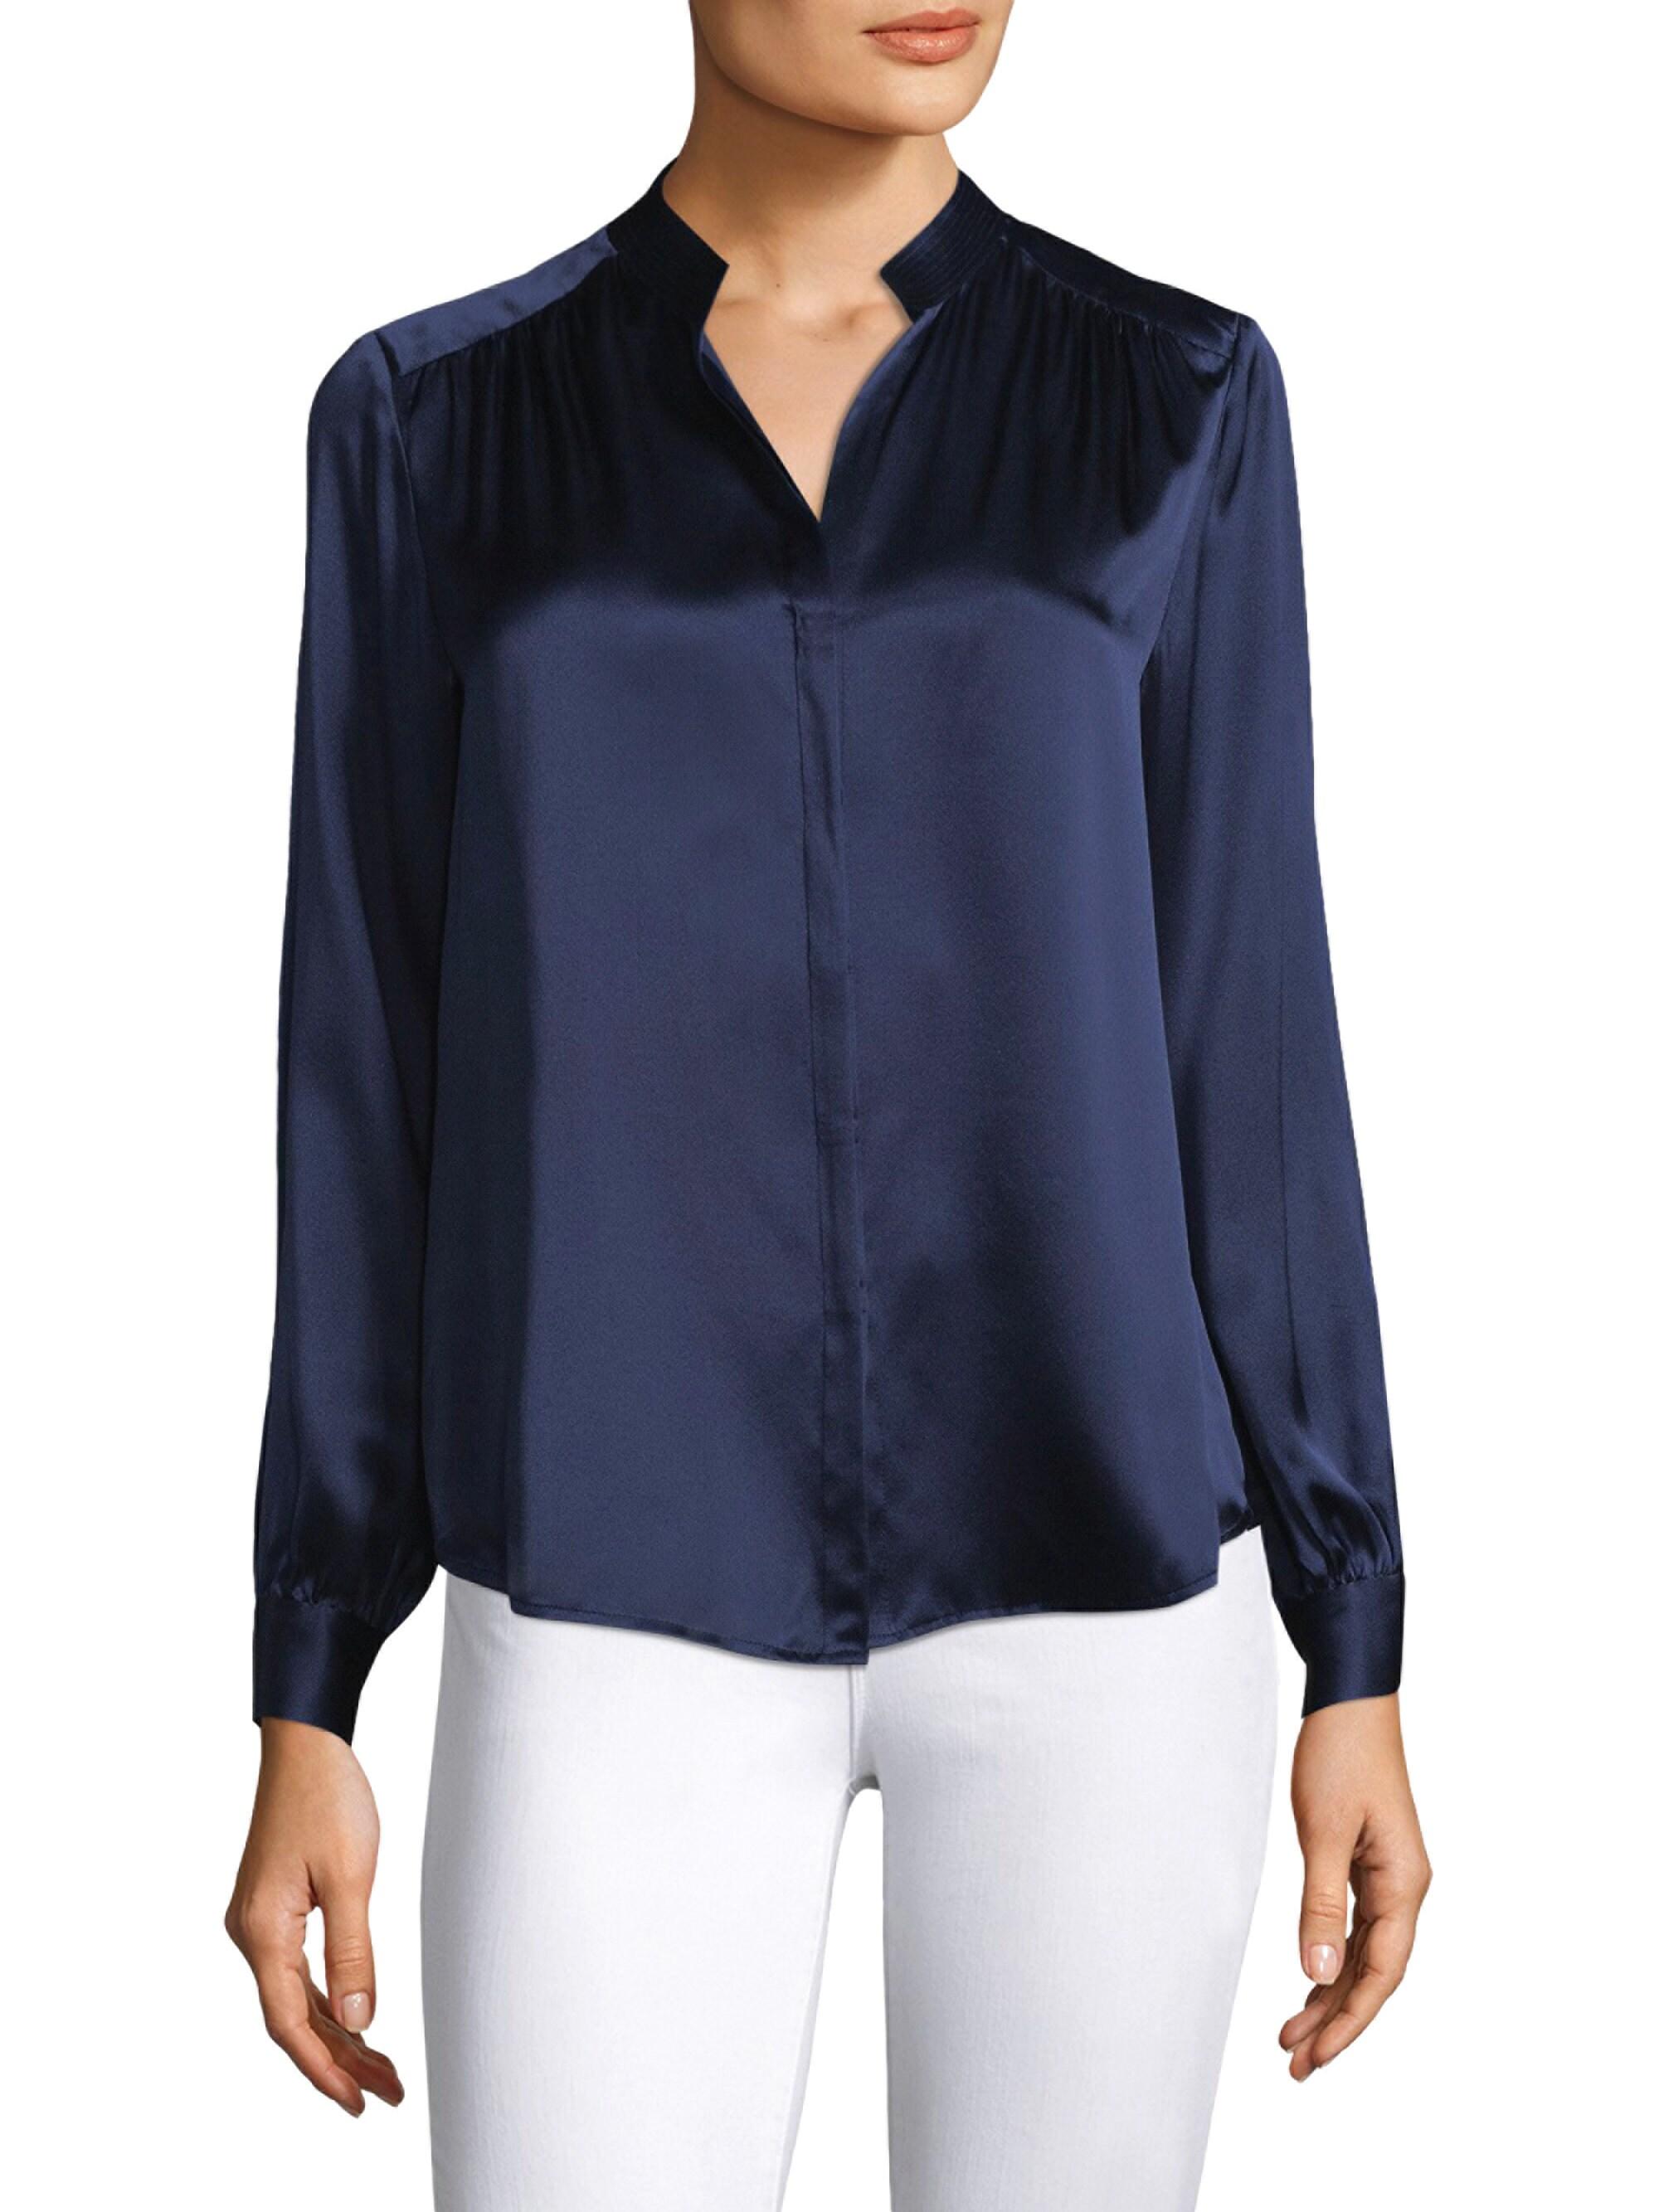 L'Agence Bianca Silk Charmeuse Blouse in Navy (Blue) - Lyst